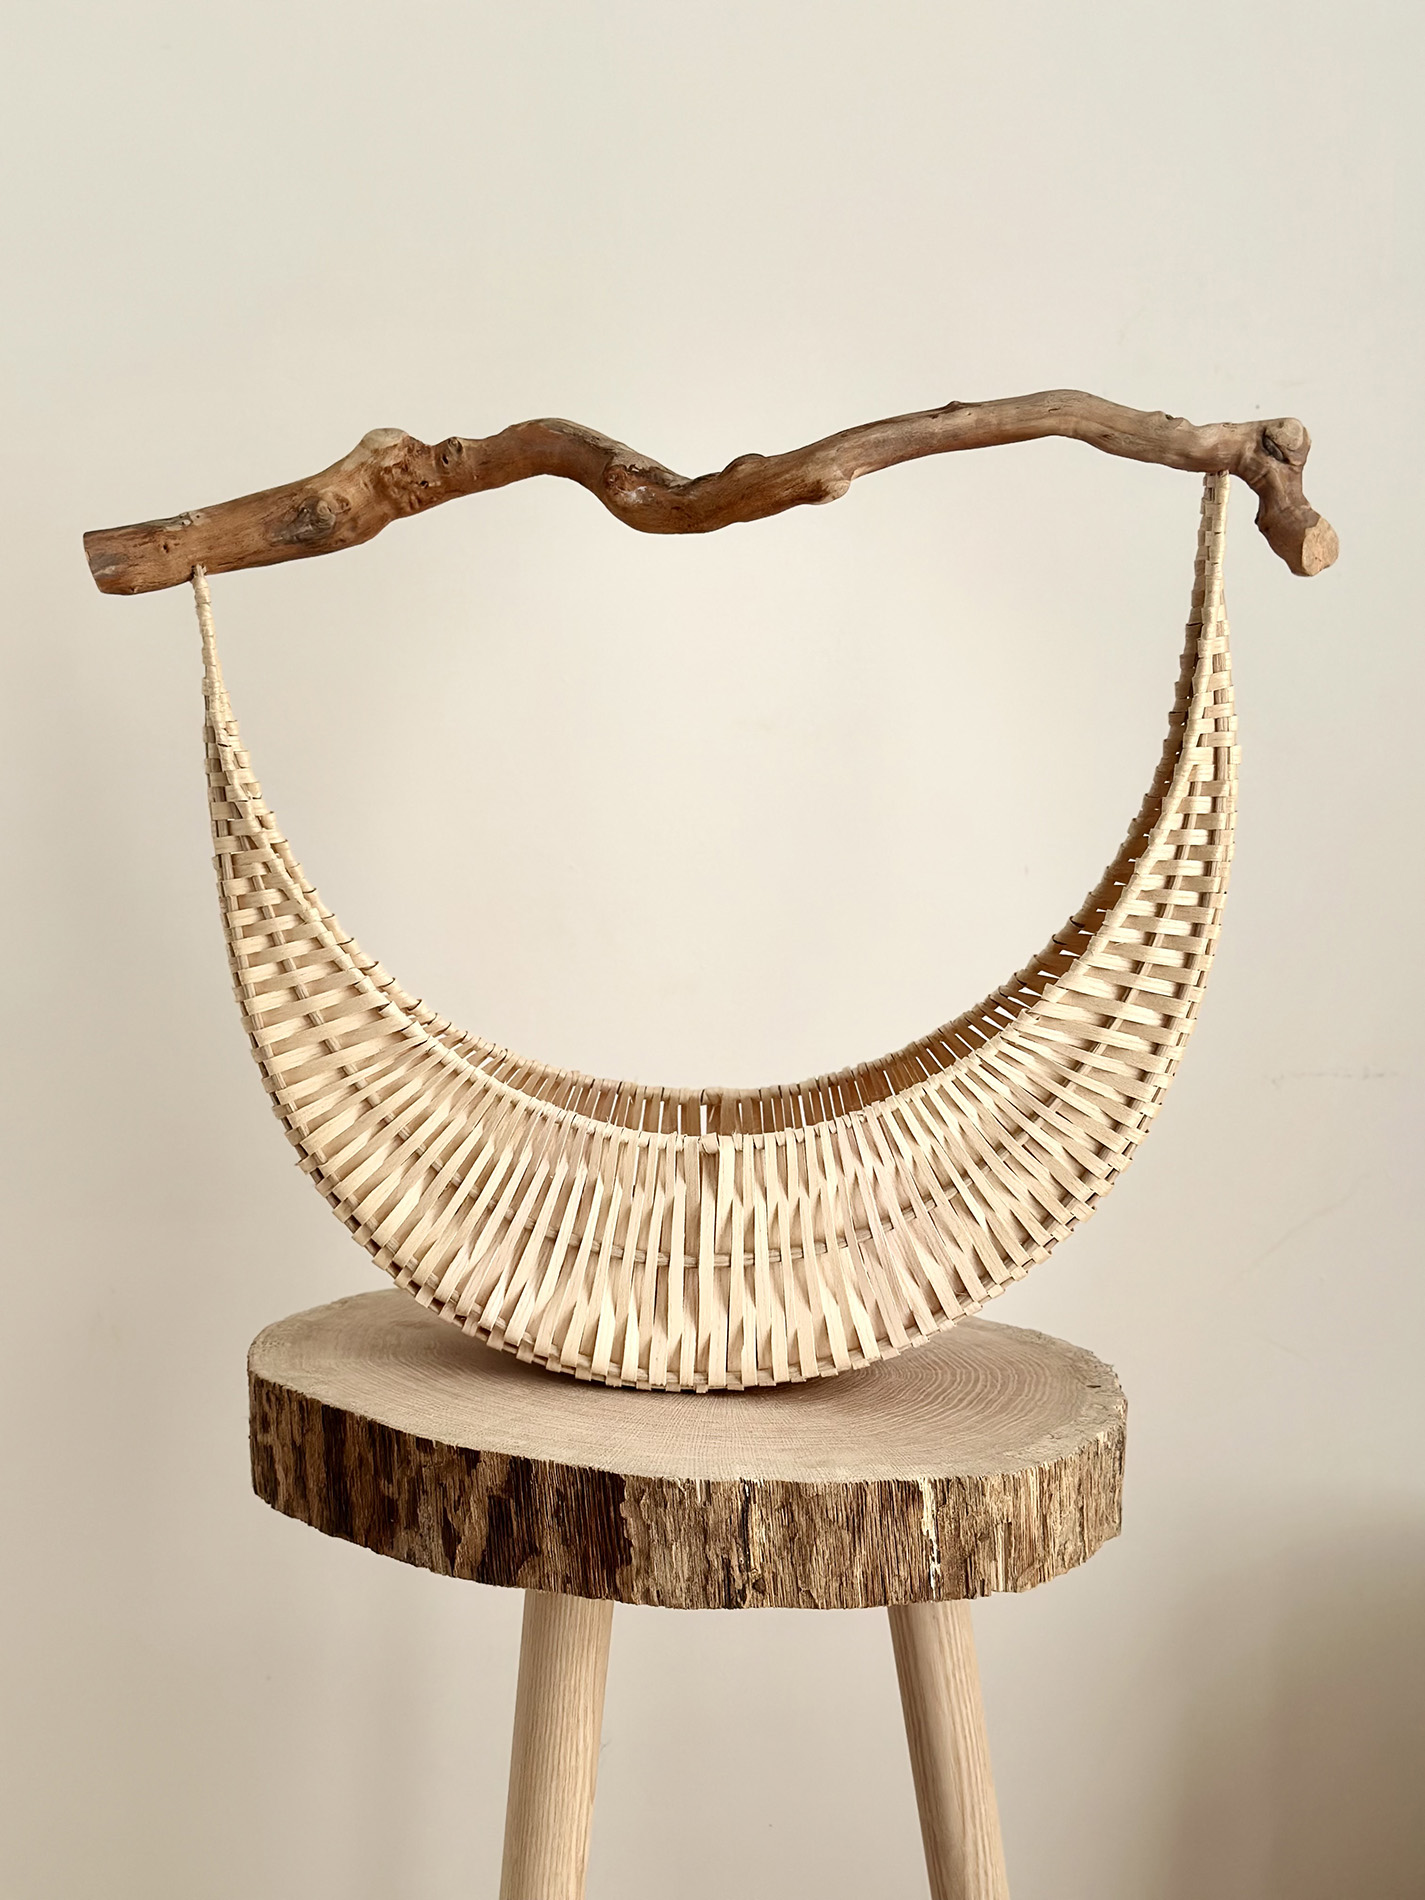 Amy Krone – sustainably harvested white oak/salvaged tree roots